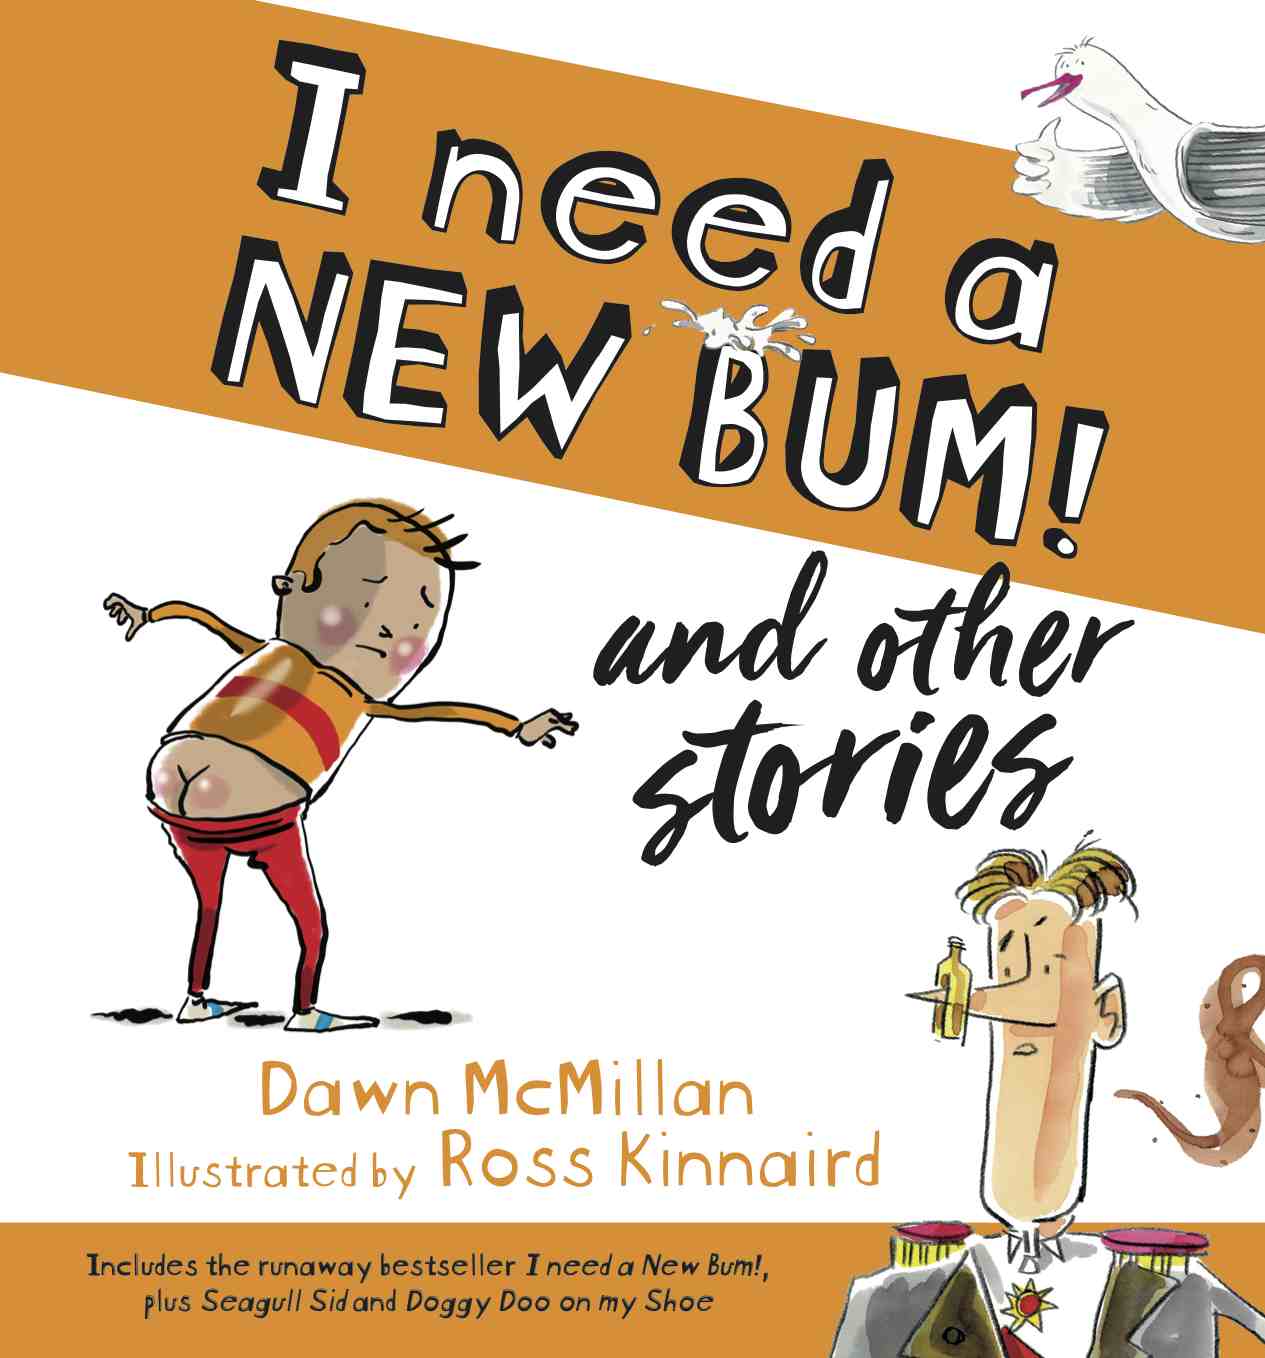 I need a NEW BUM! and other stories